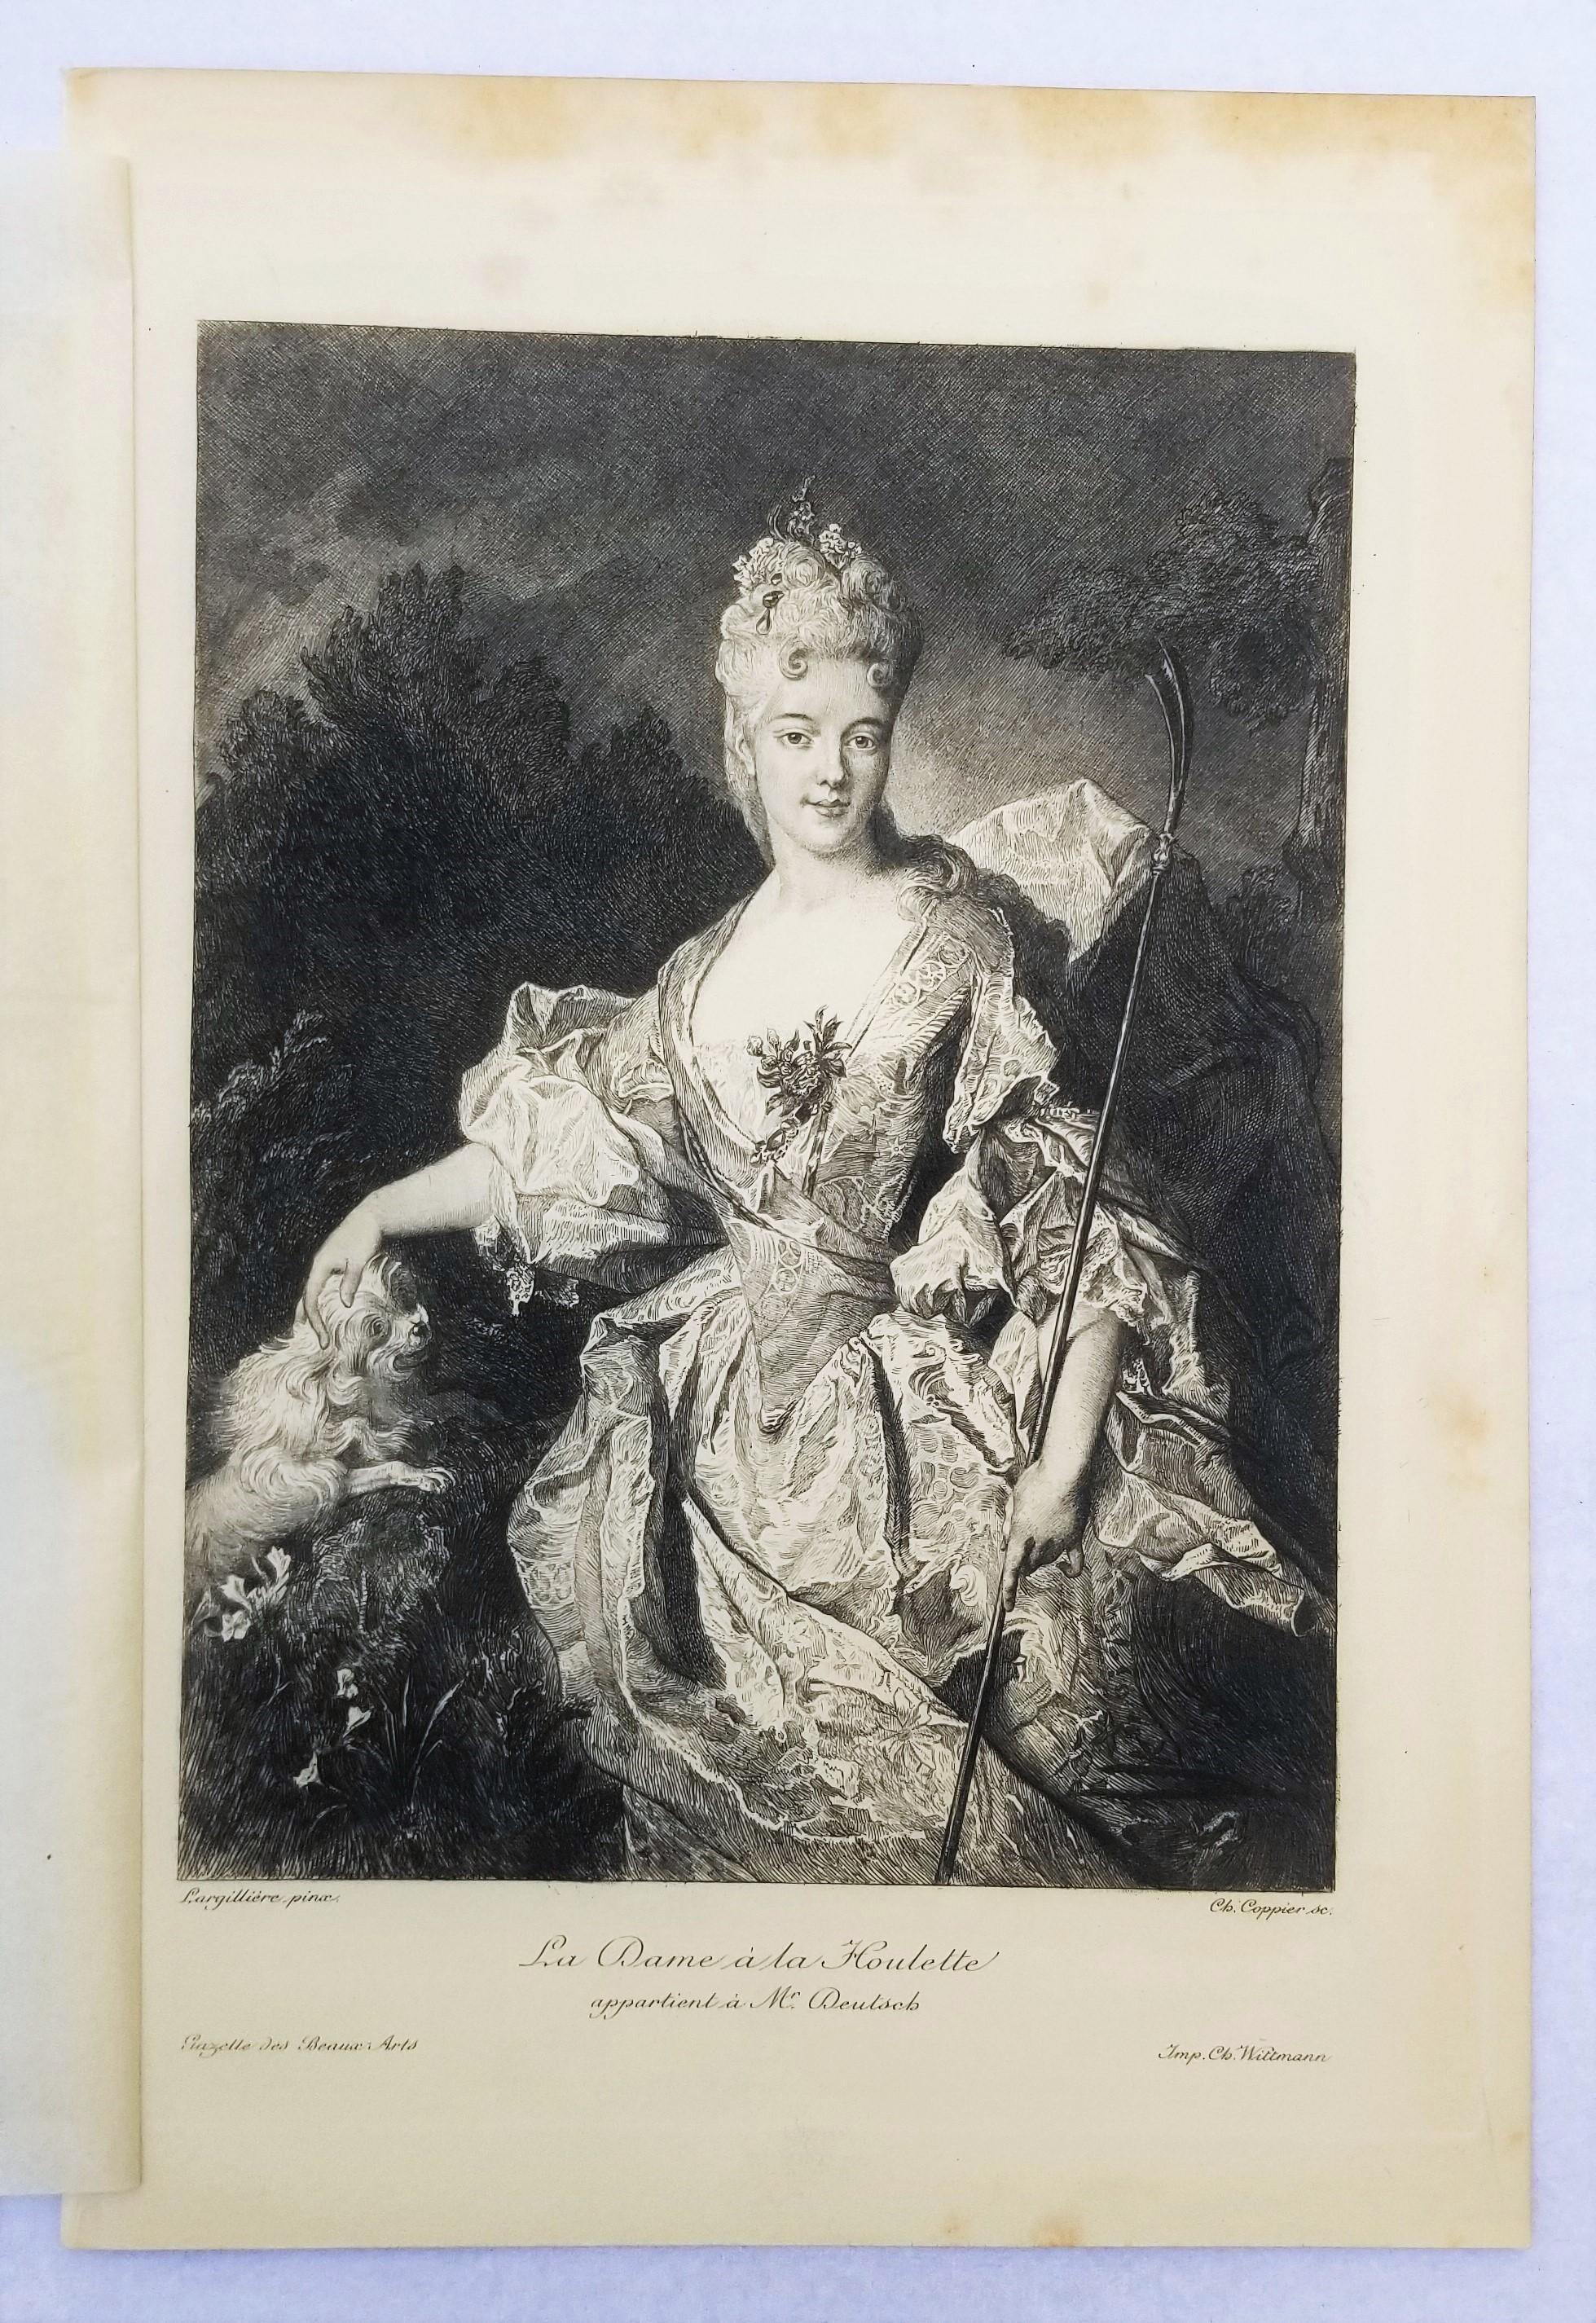 La Dame a la Houlette (The Lady at the Houlette) - Old Masters Print by André-Charles Coppier